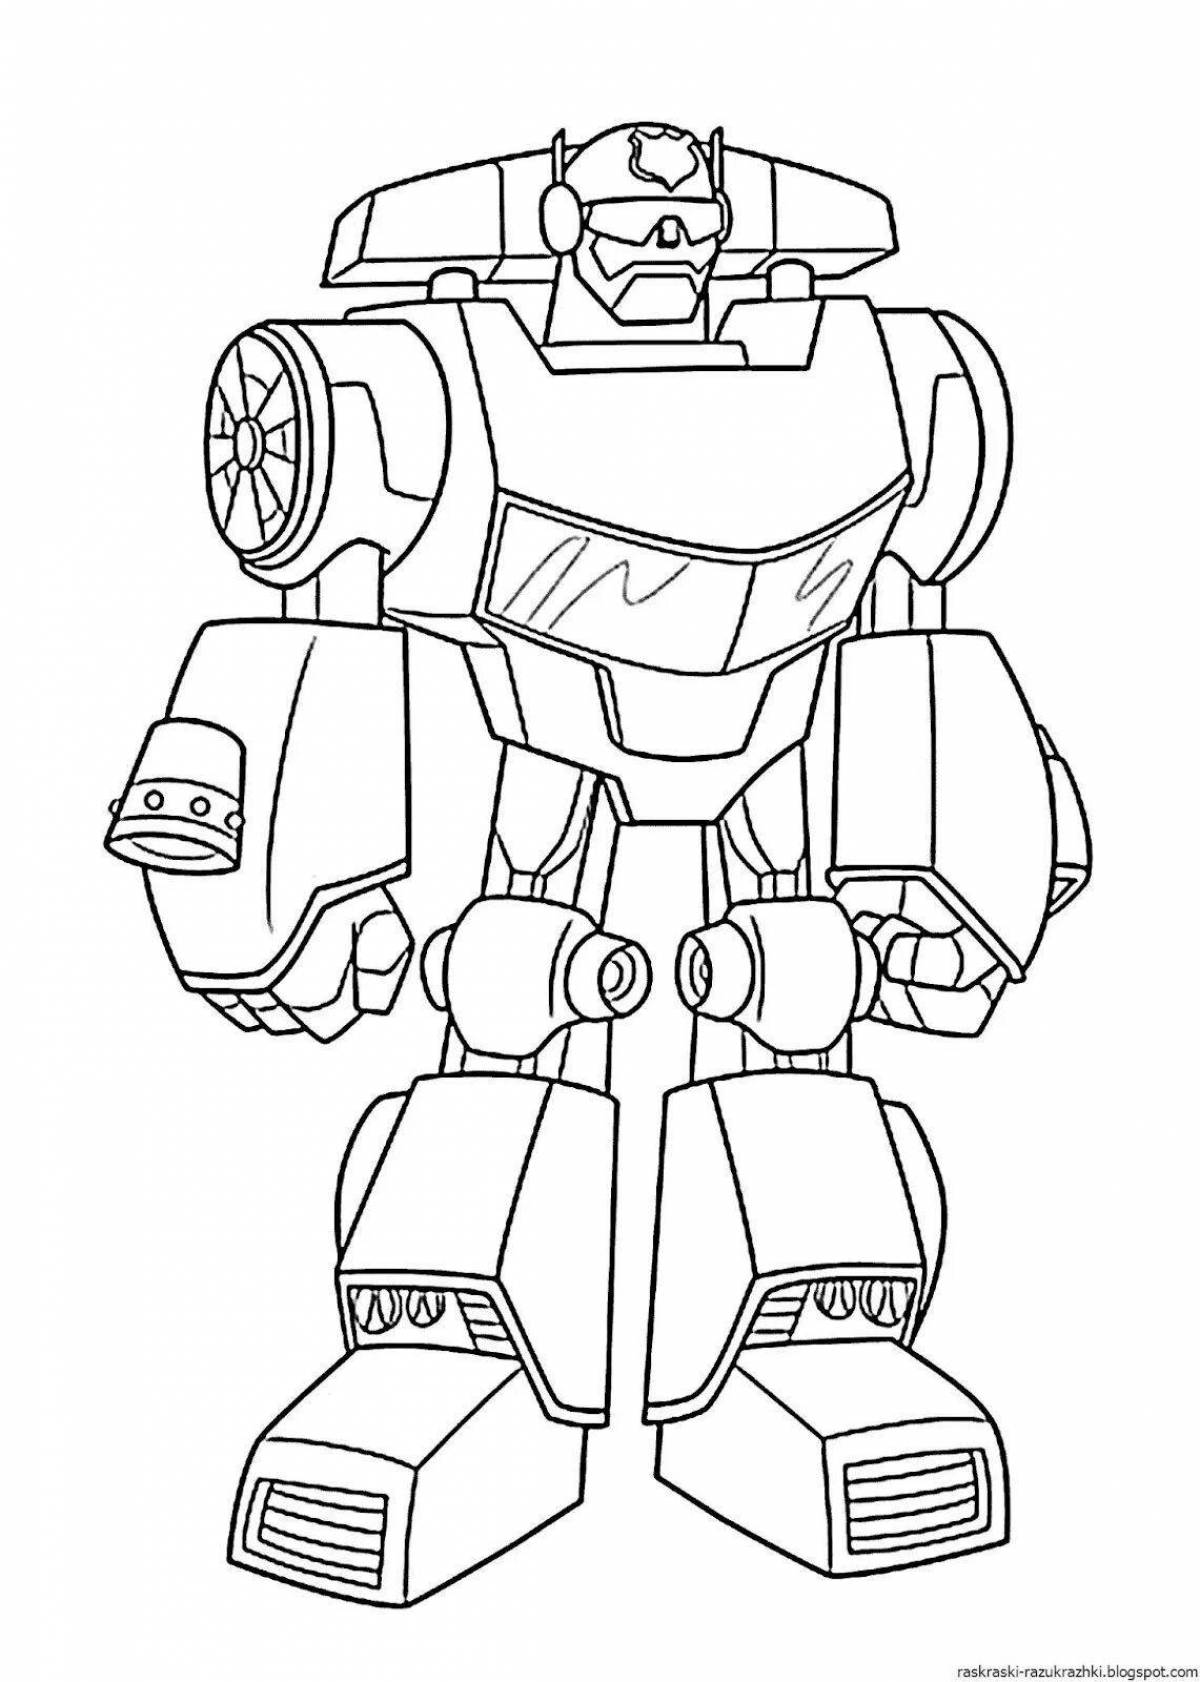 Outstanding robot coloring pages for 6-7 year old boys